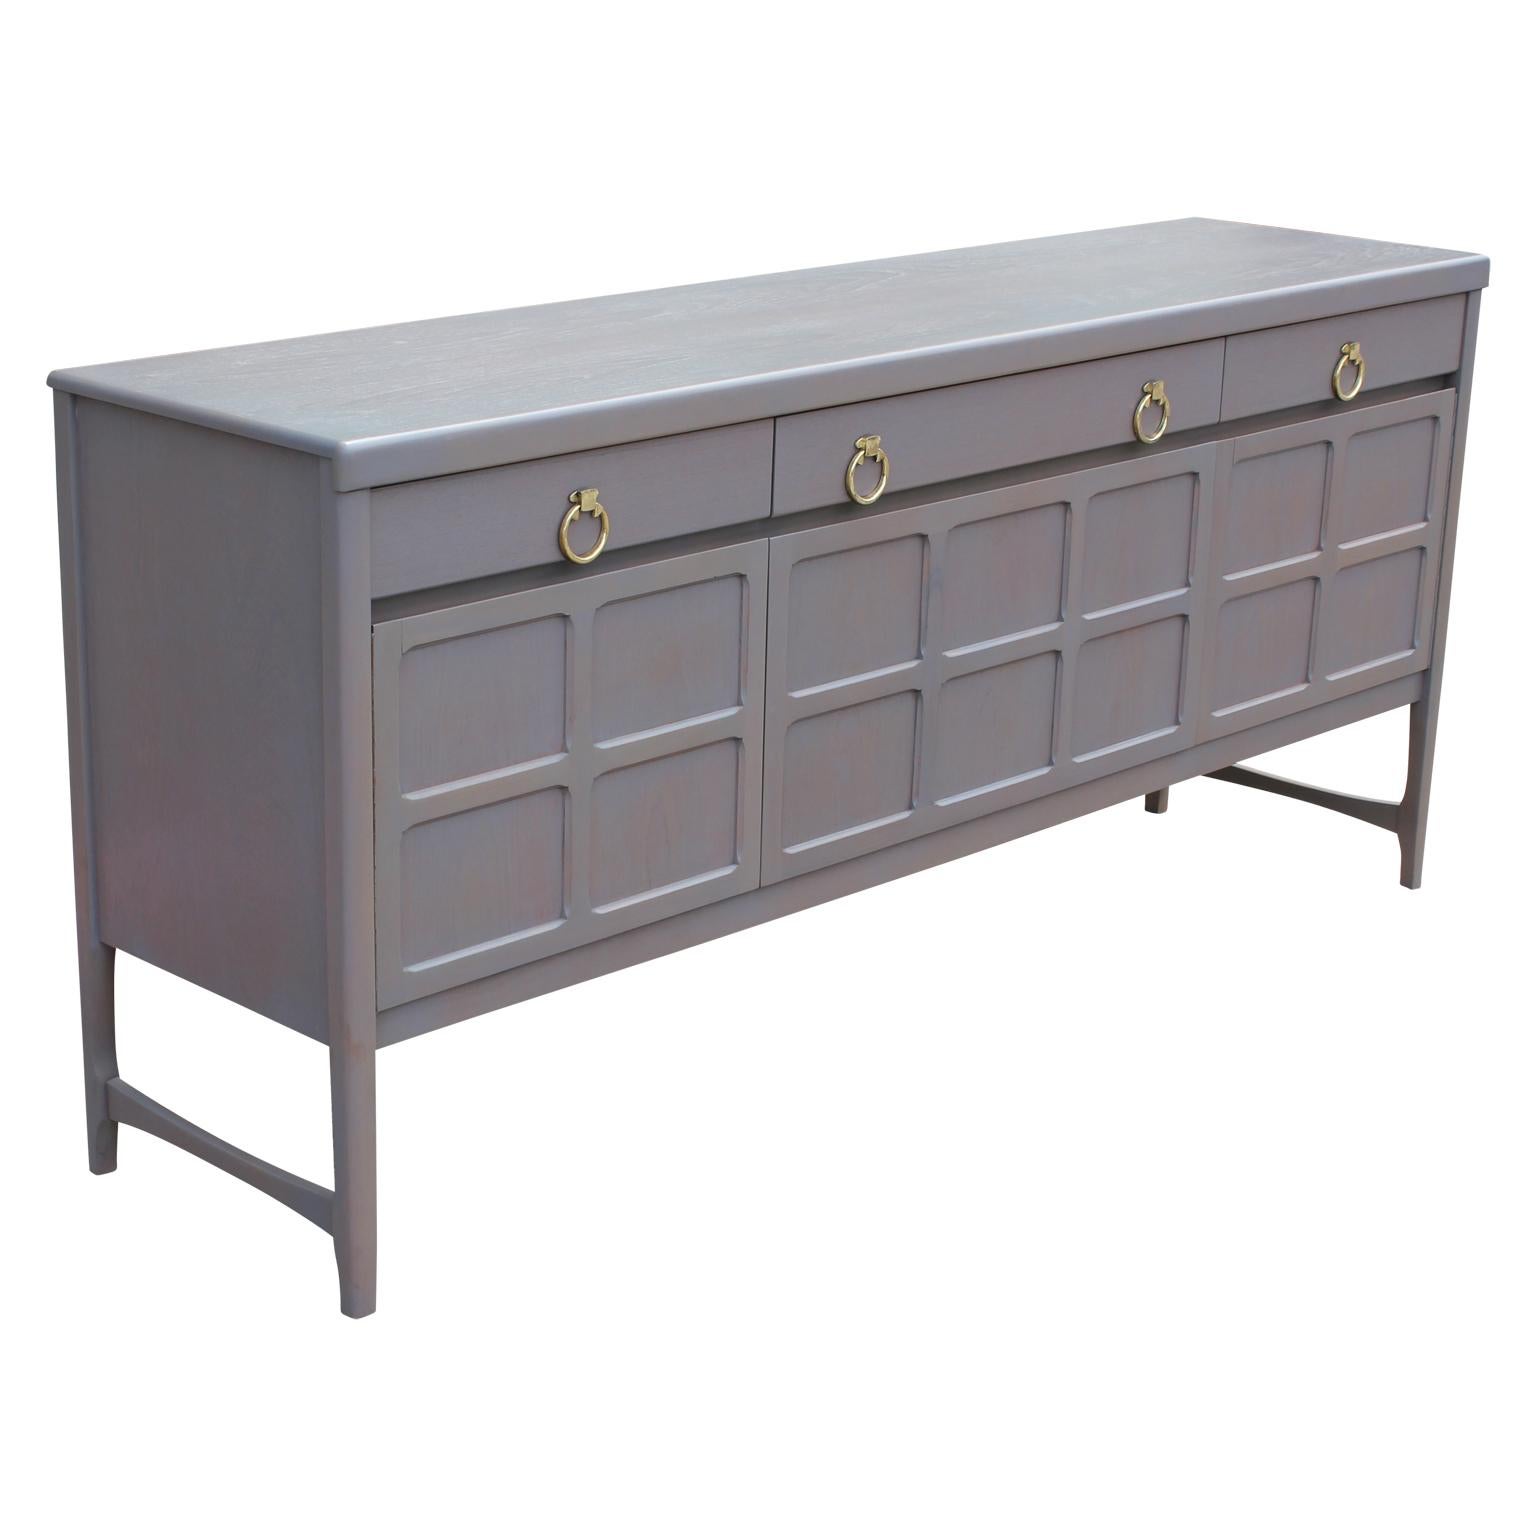 Freshly refinished sophisticated grey sideboard with brass ring handles. Centre cabinet drops down. Three drawers provide additional storage.